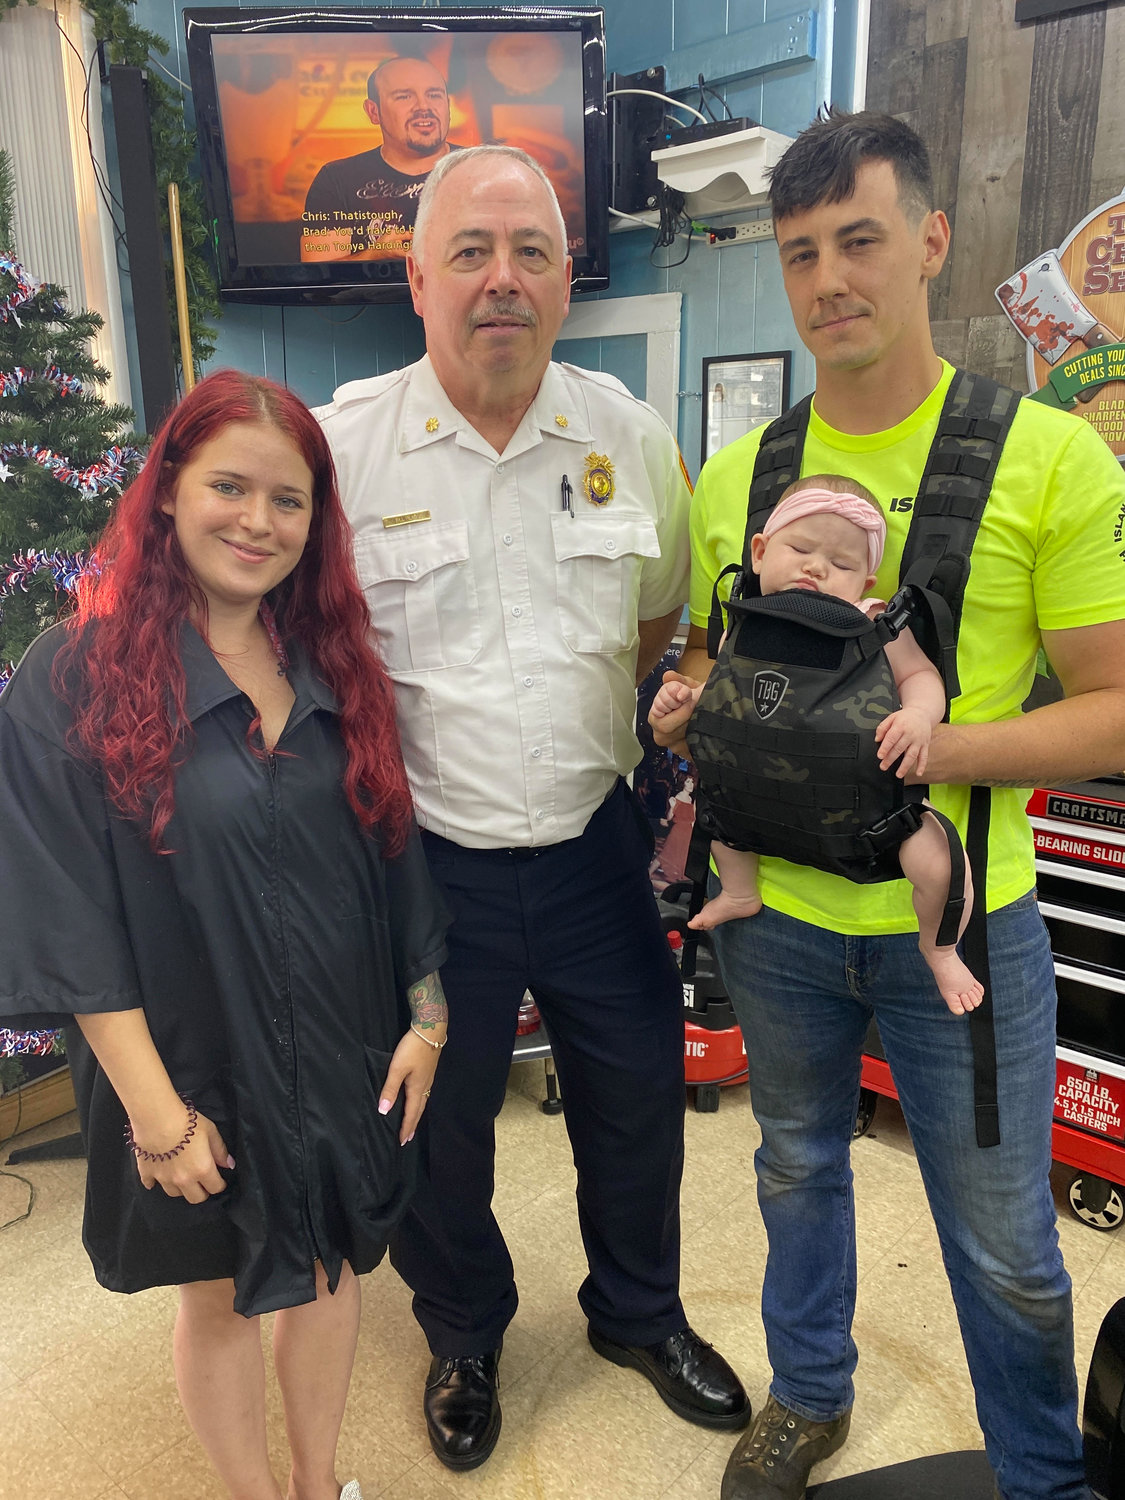 Josette Manzolillo (left), daughter of the owners of Jenny’s JNT Beauty Barbershop, with partner Matt Stevenson (right), baby Scarlett (front) and deputy inspector Bill Read (right) of the 7th Precinct.